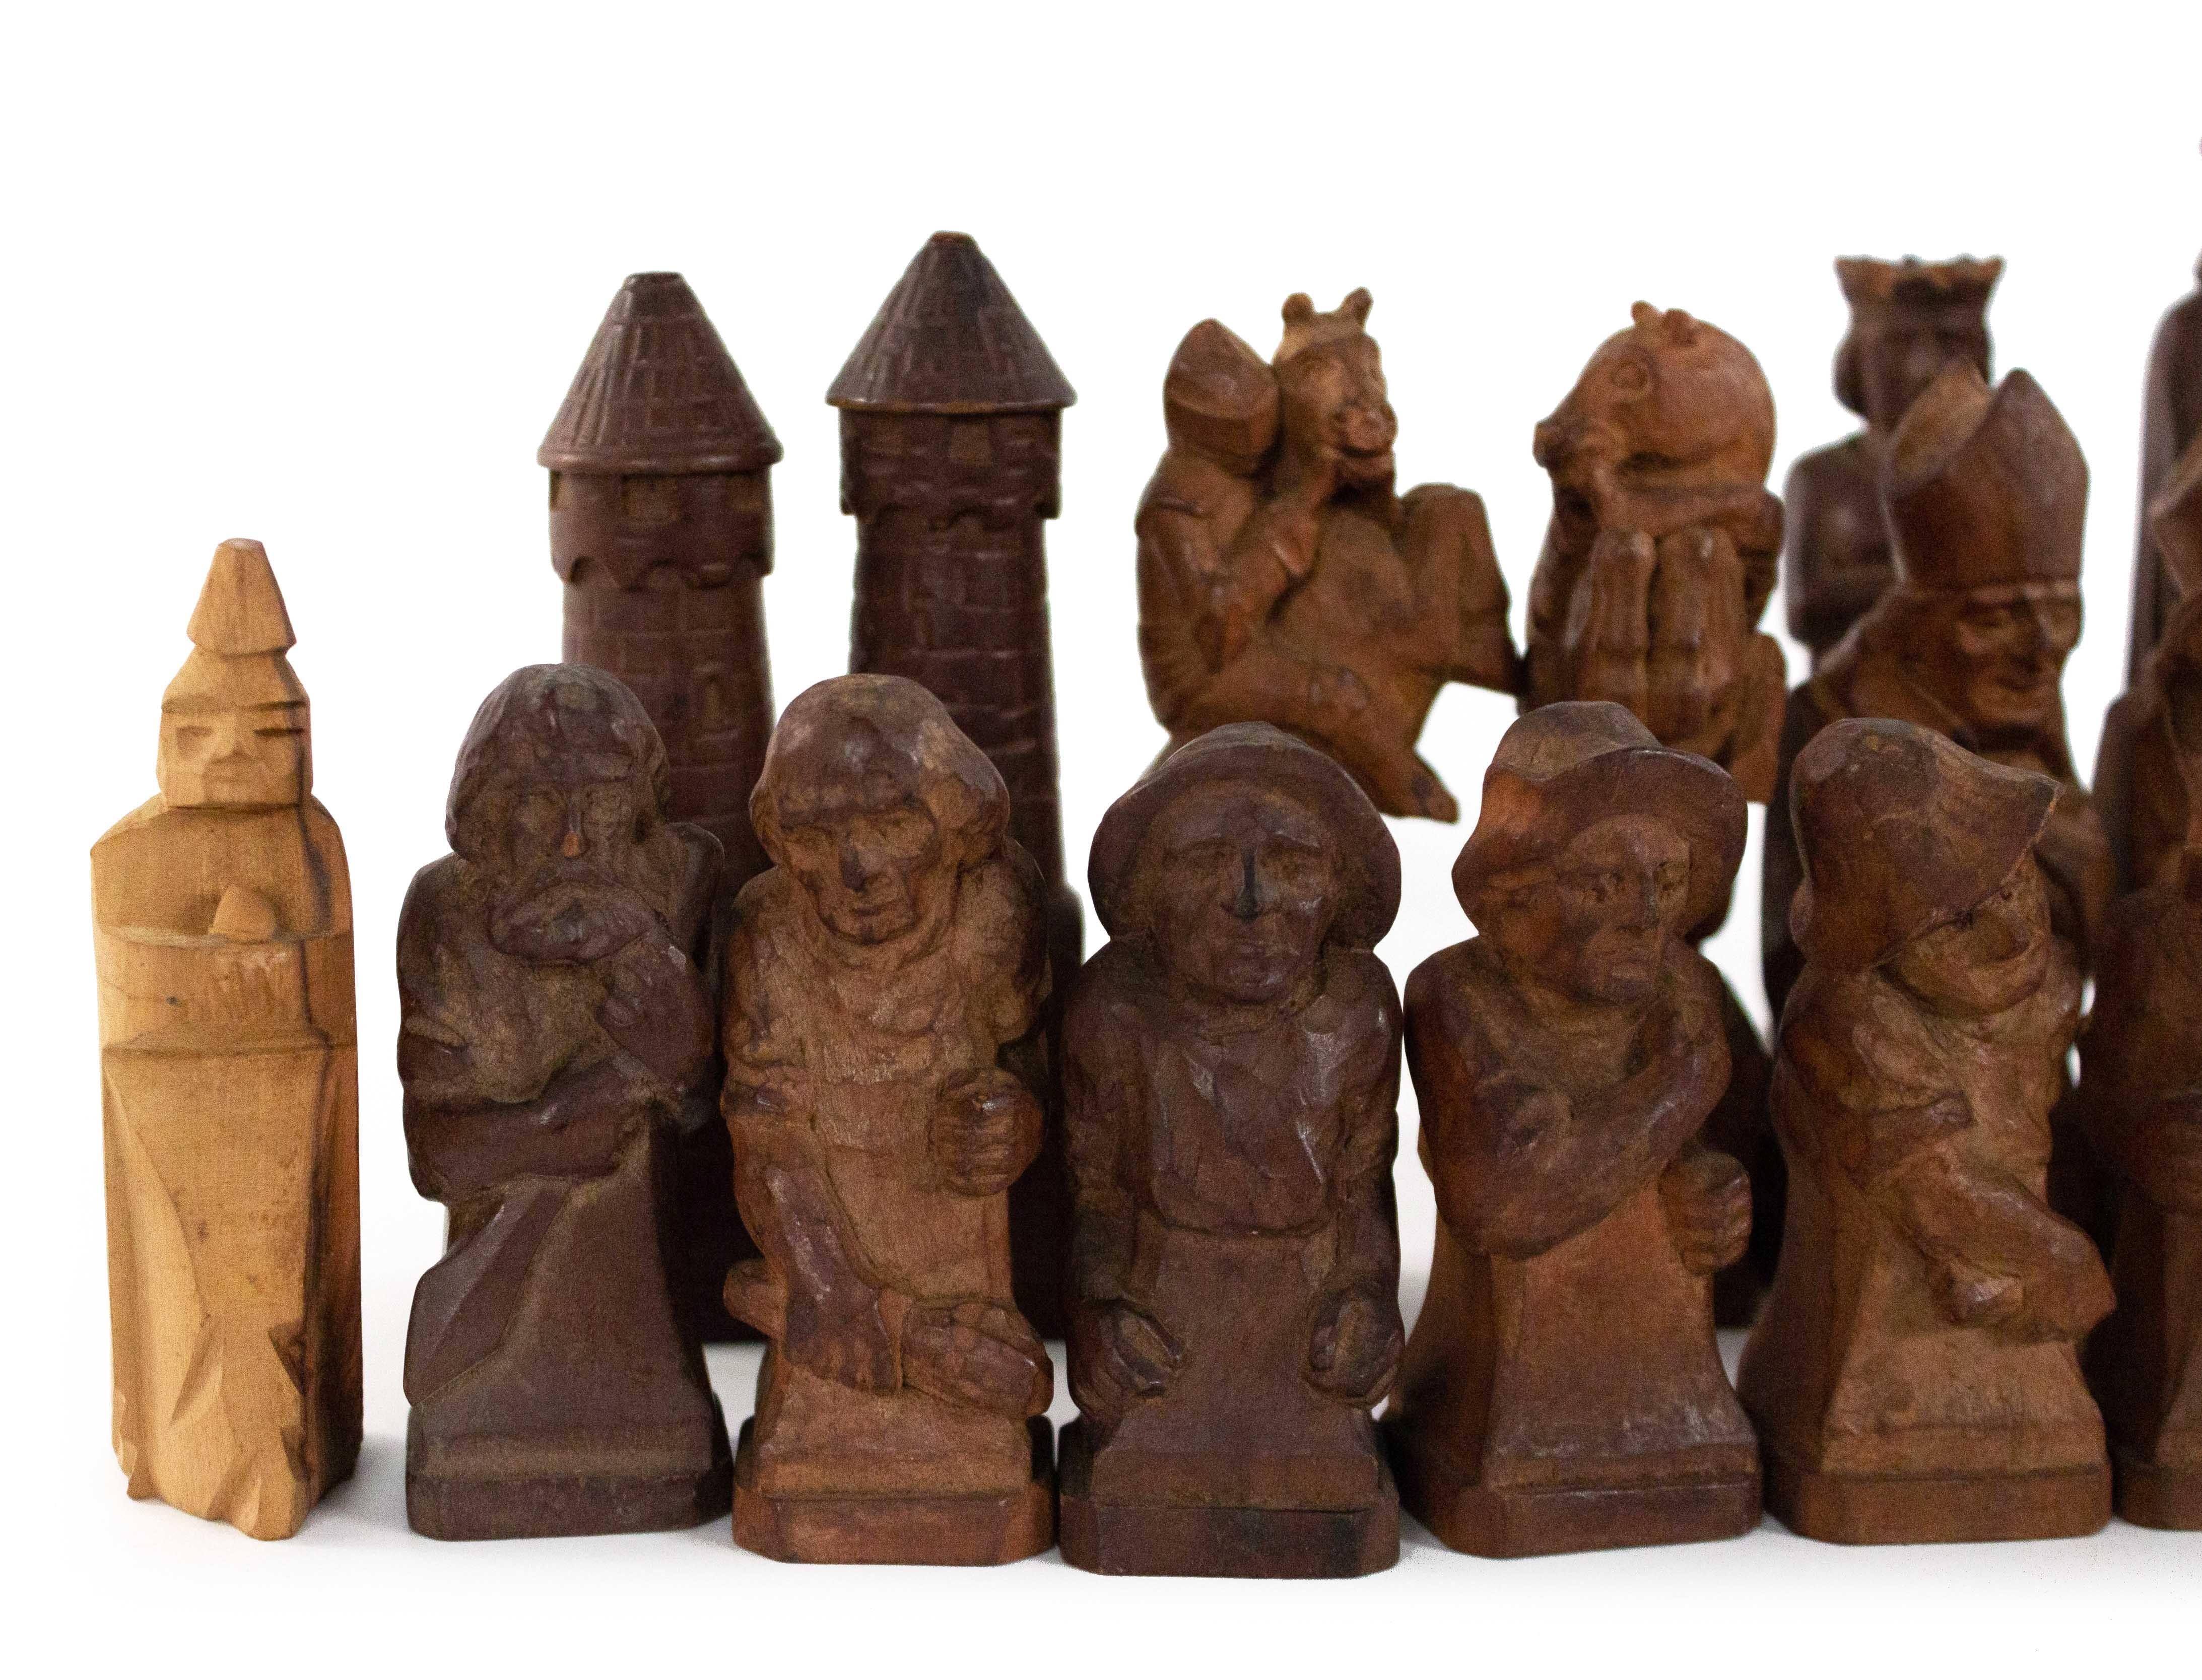 German Continental (1sts quarter 20th Century) hand-carved wooden chess set with 32 pieces. (two pawns are not original). (Marked on base: 